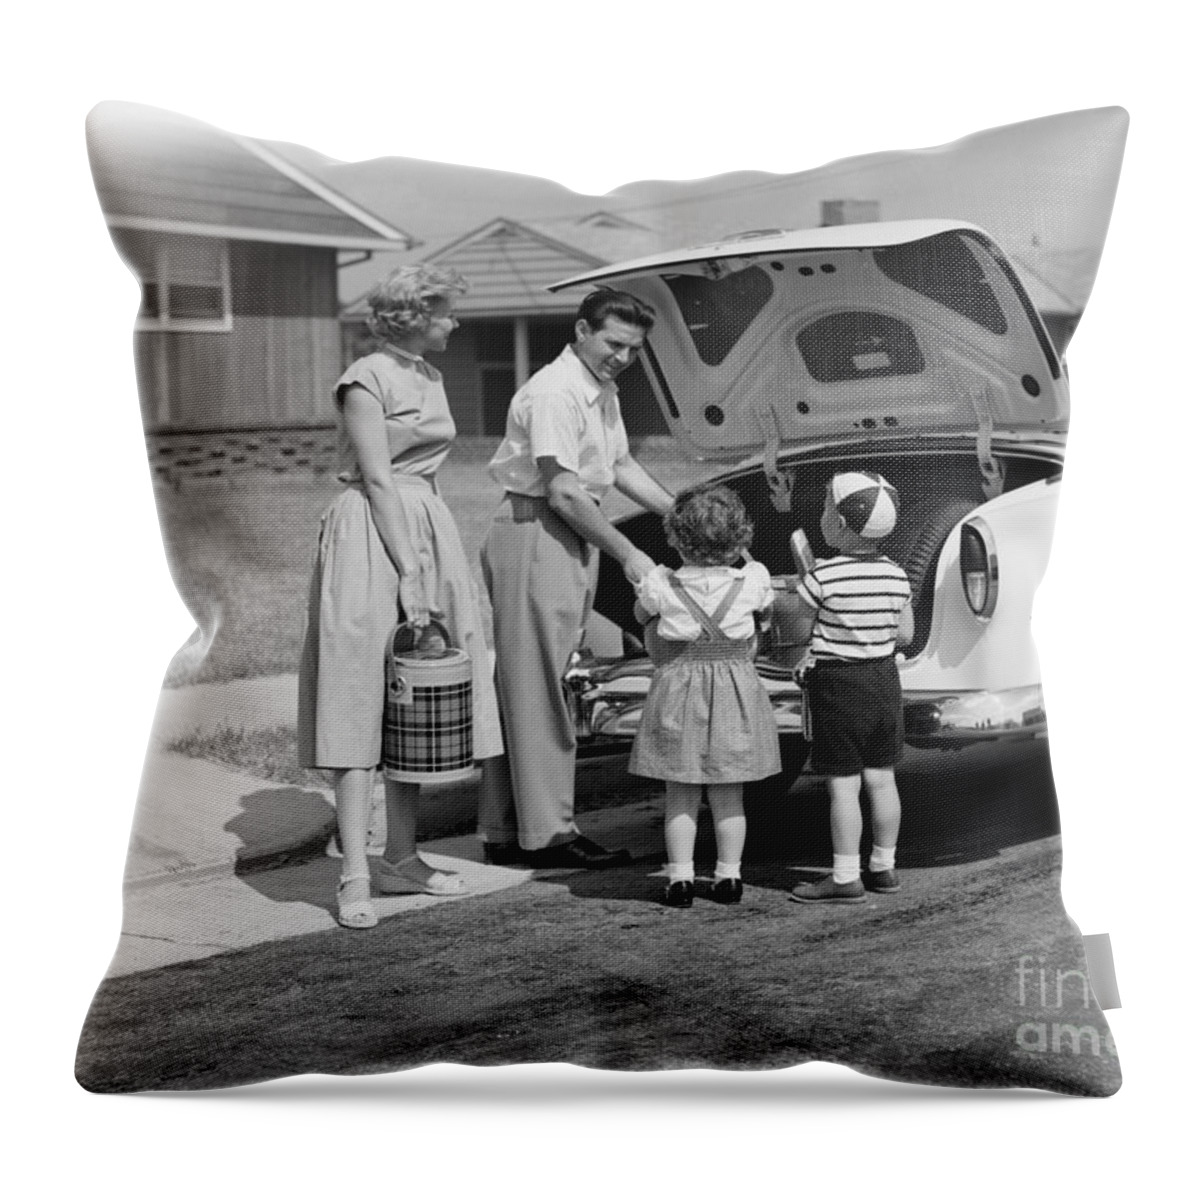 1950s Throw Pillow featuring the photograph Family Setting Out For A Picnic, C.1950s by H. Armstrong Roberts/ClassicStock